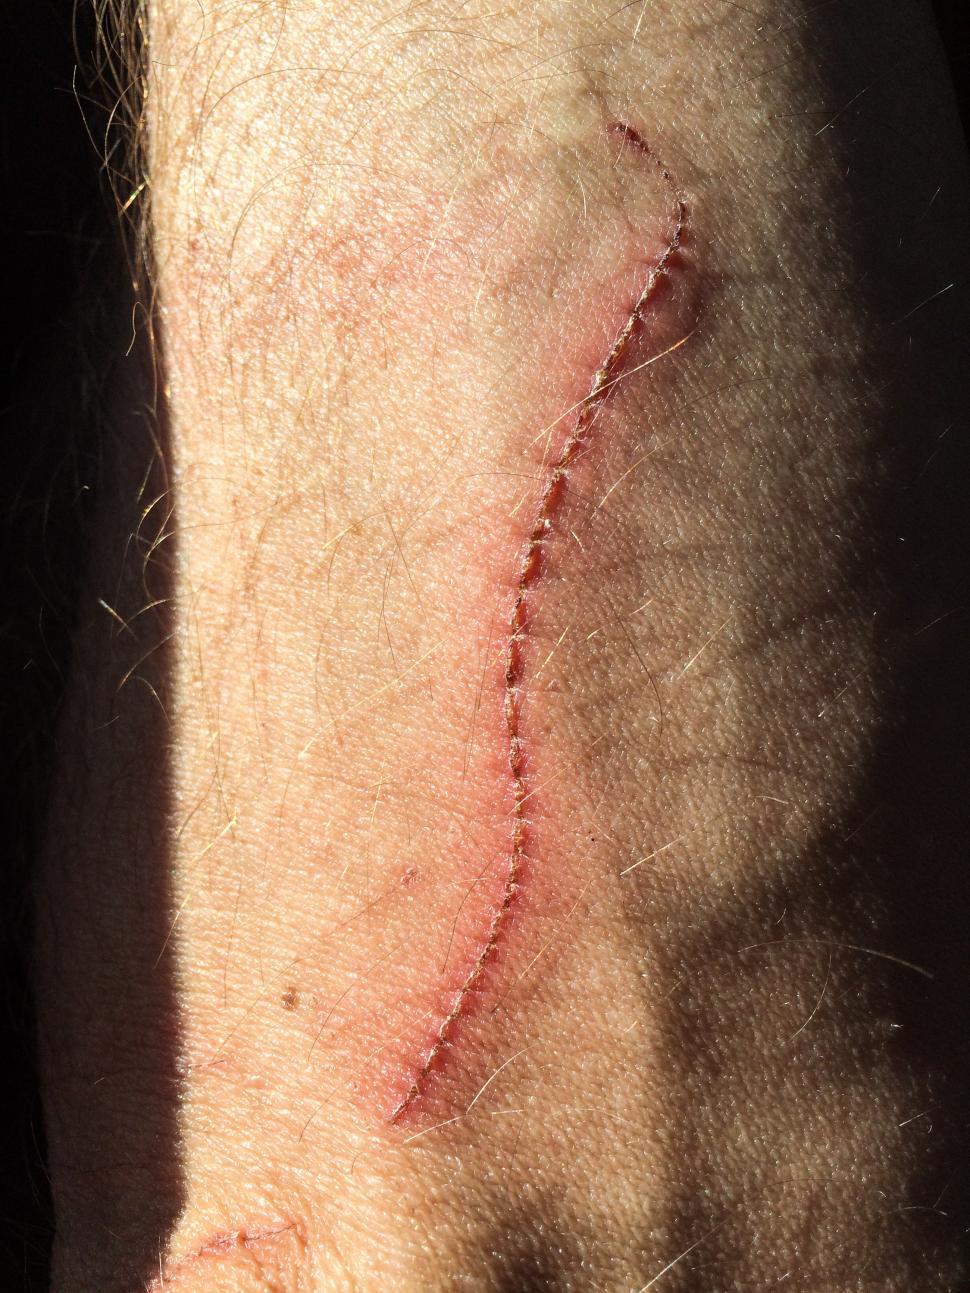 Download Free Stock Photo of Healing wound on arm 